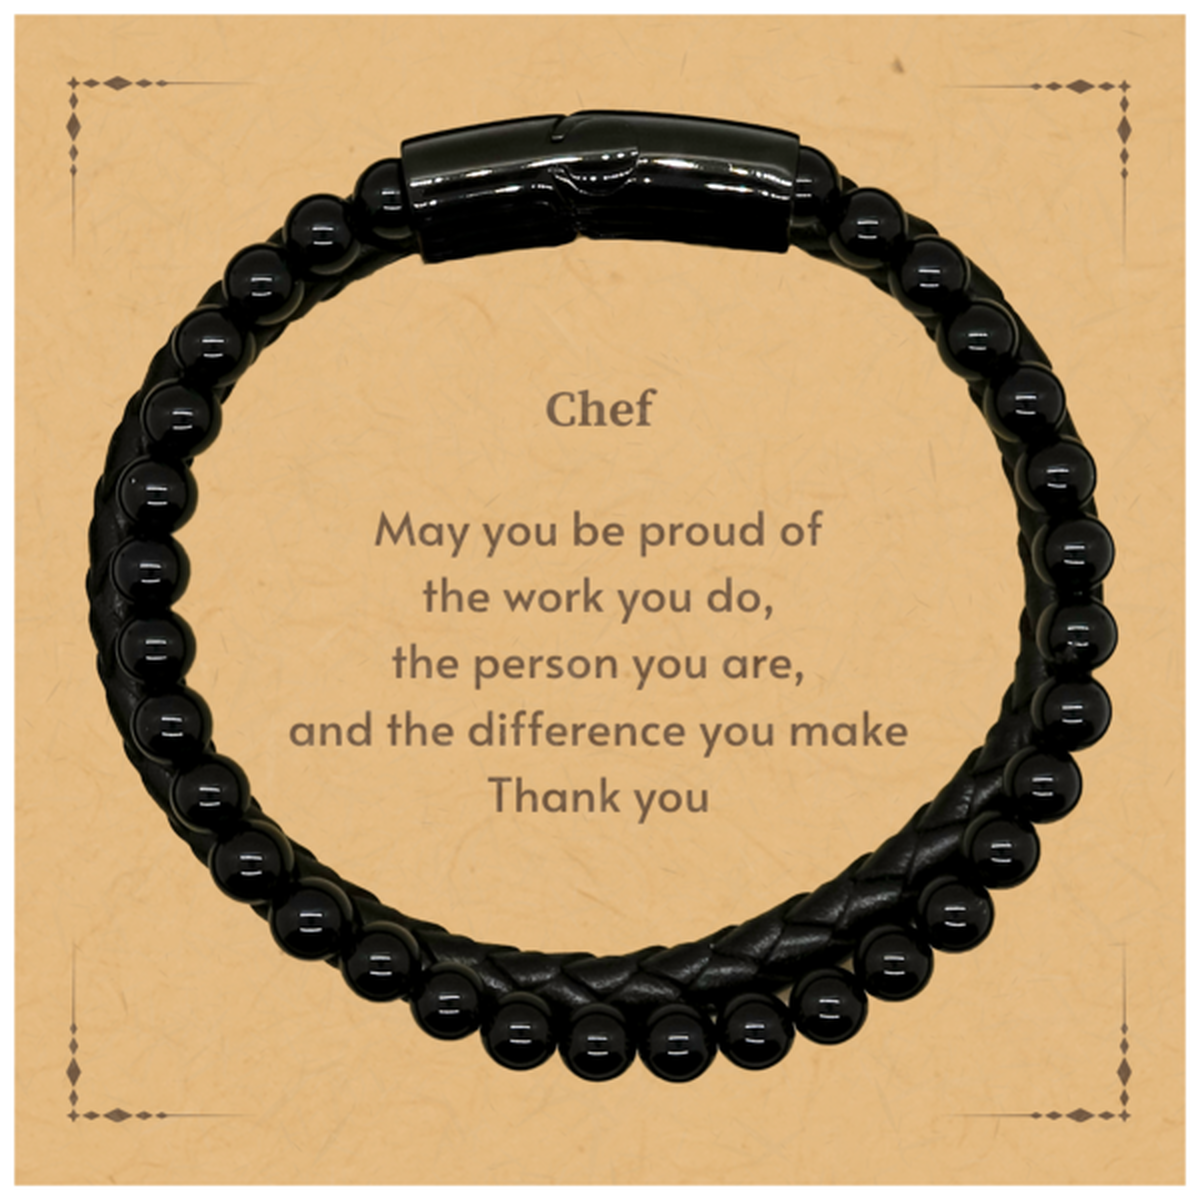 Heartwarming Stone Leather Bracelets Retirement Coworkers Gifts for Chef, Chef May You be proud of the work you do, the person you are Gifts for Boss Men Women Friends